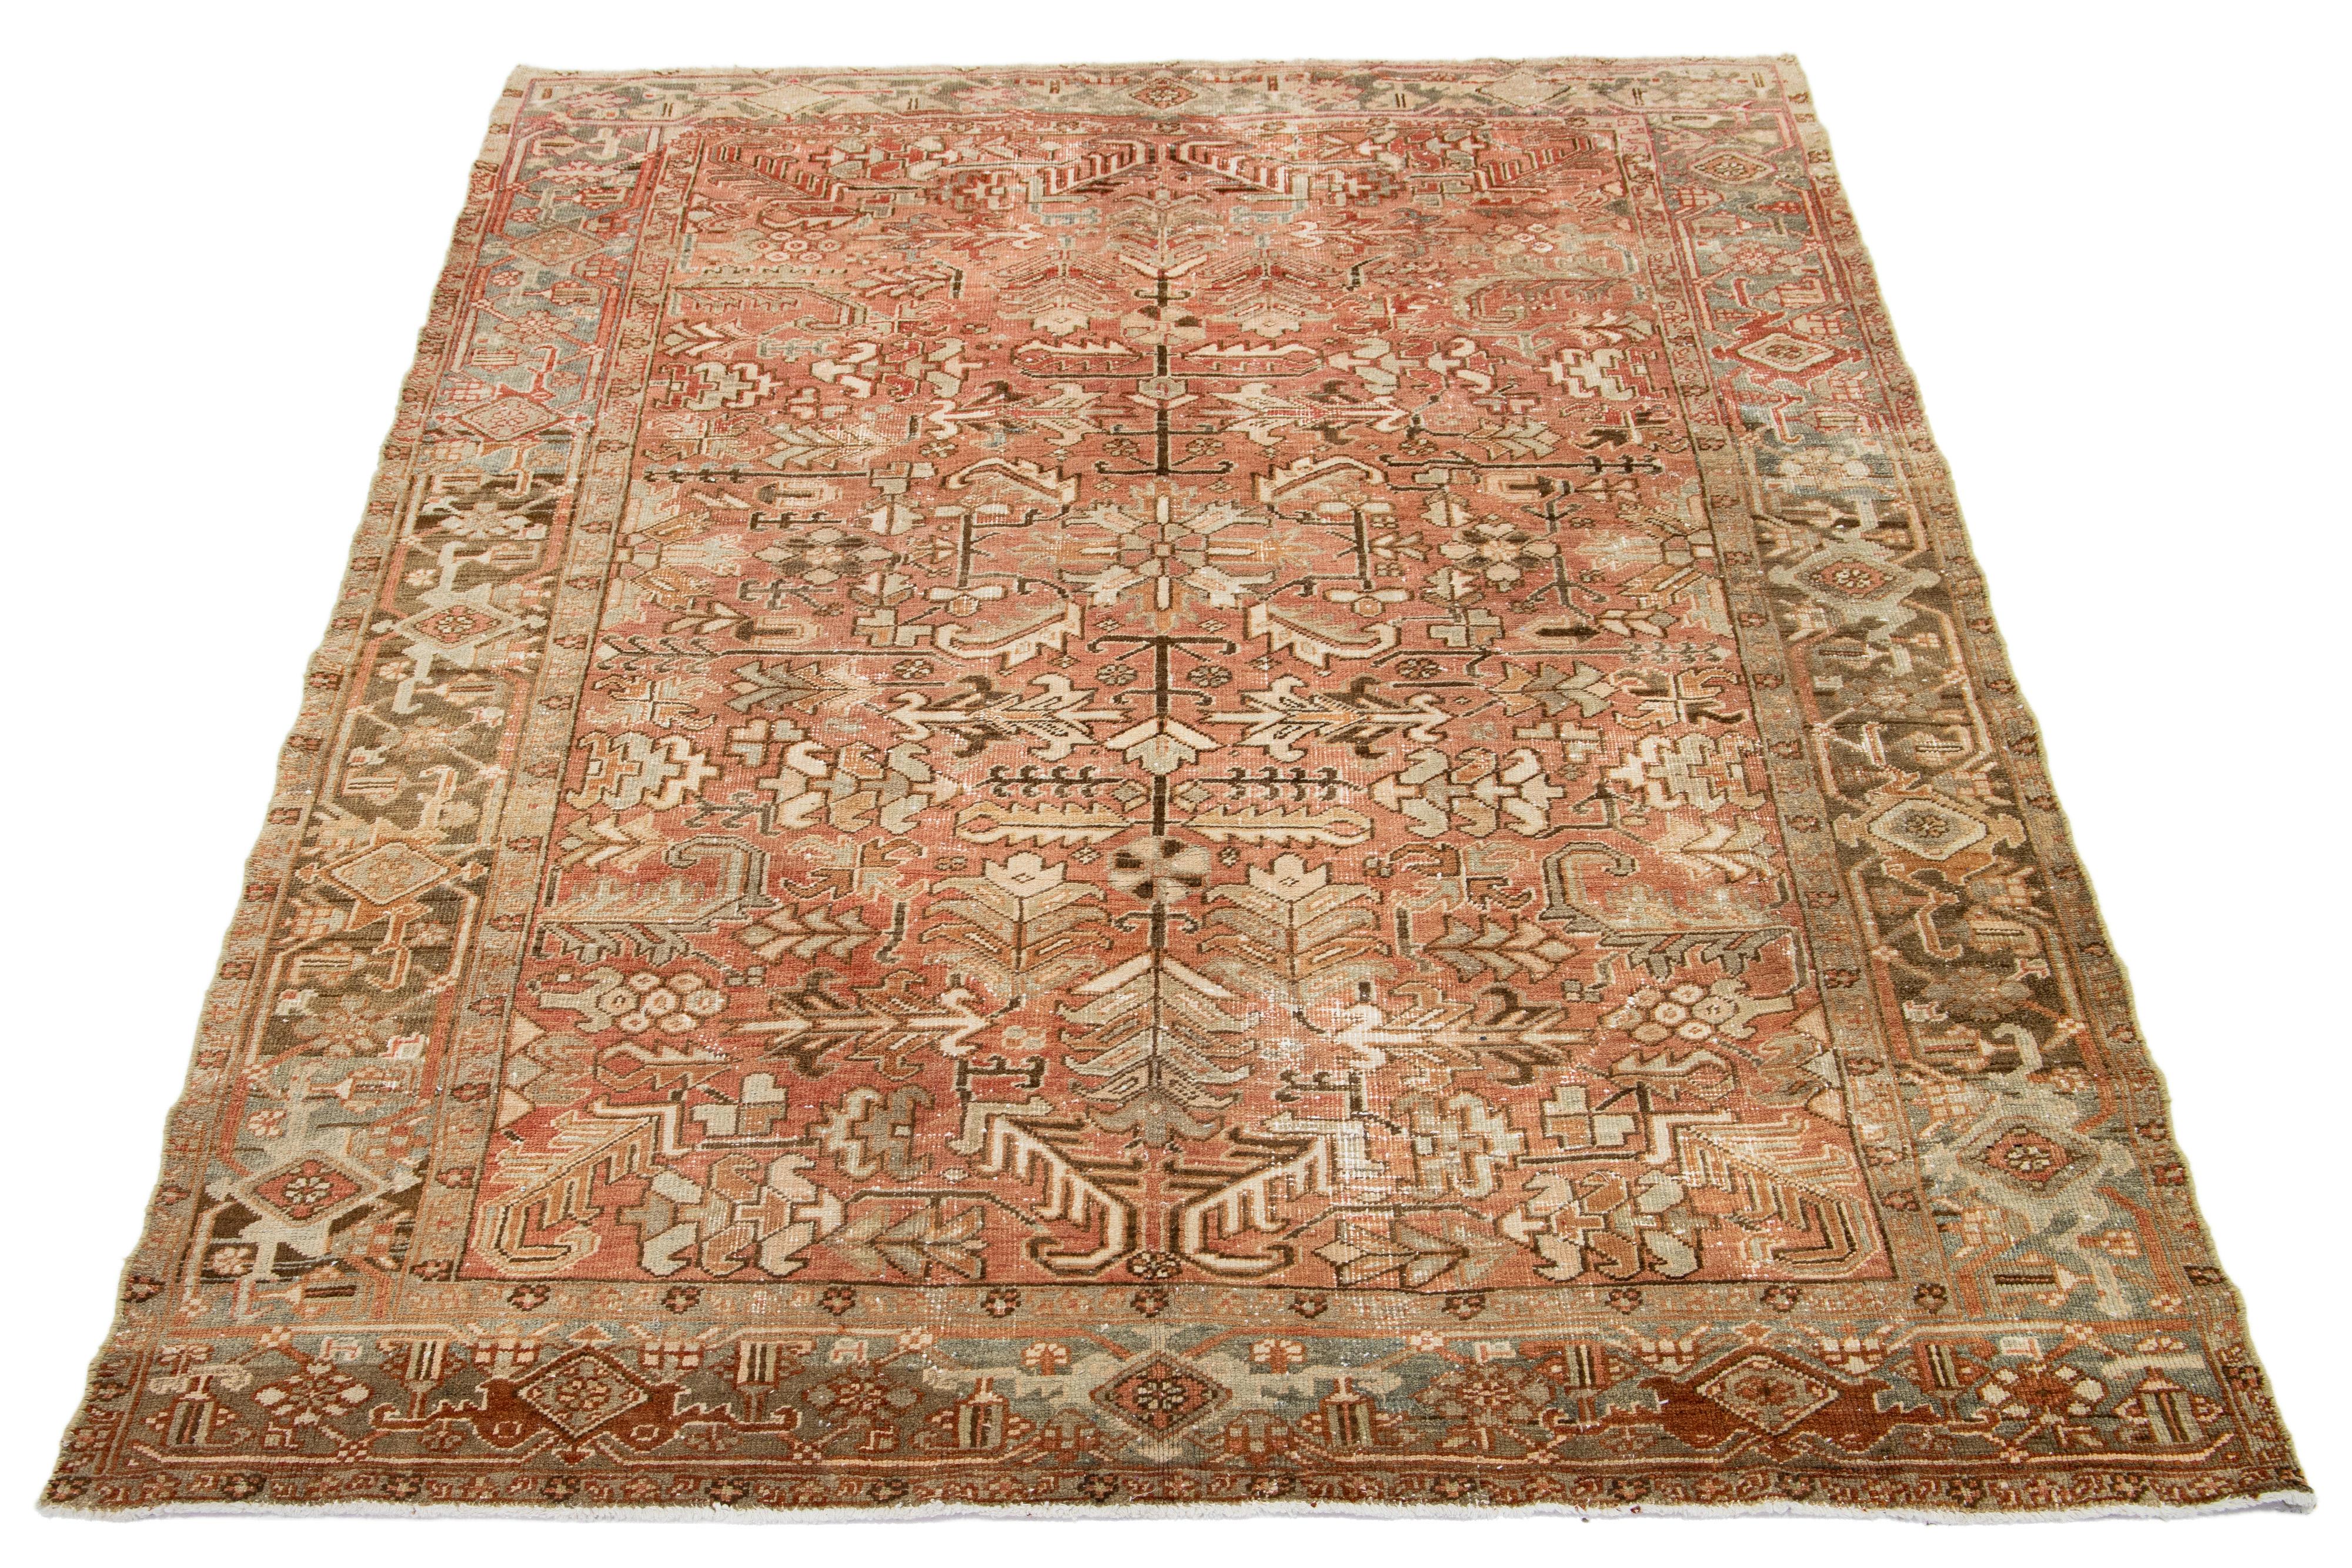 This antique Persian Heriz rug features a captivating allover pattern with shades of blue, beige, and brown on a peach field. It is hand-knotted using wool.

This rug measures 6'9